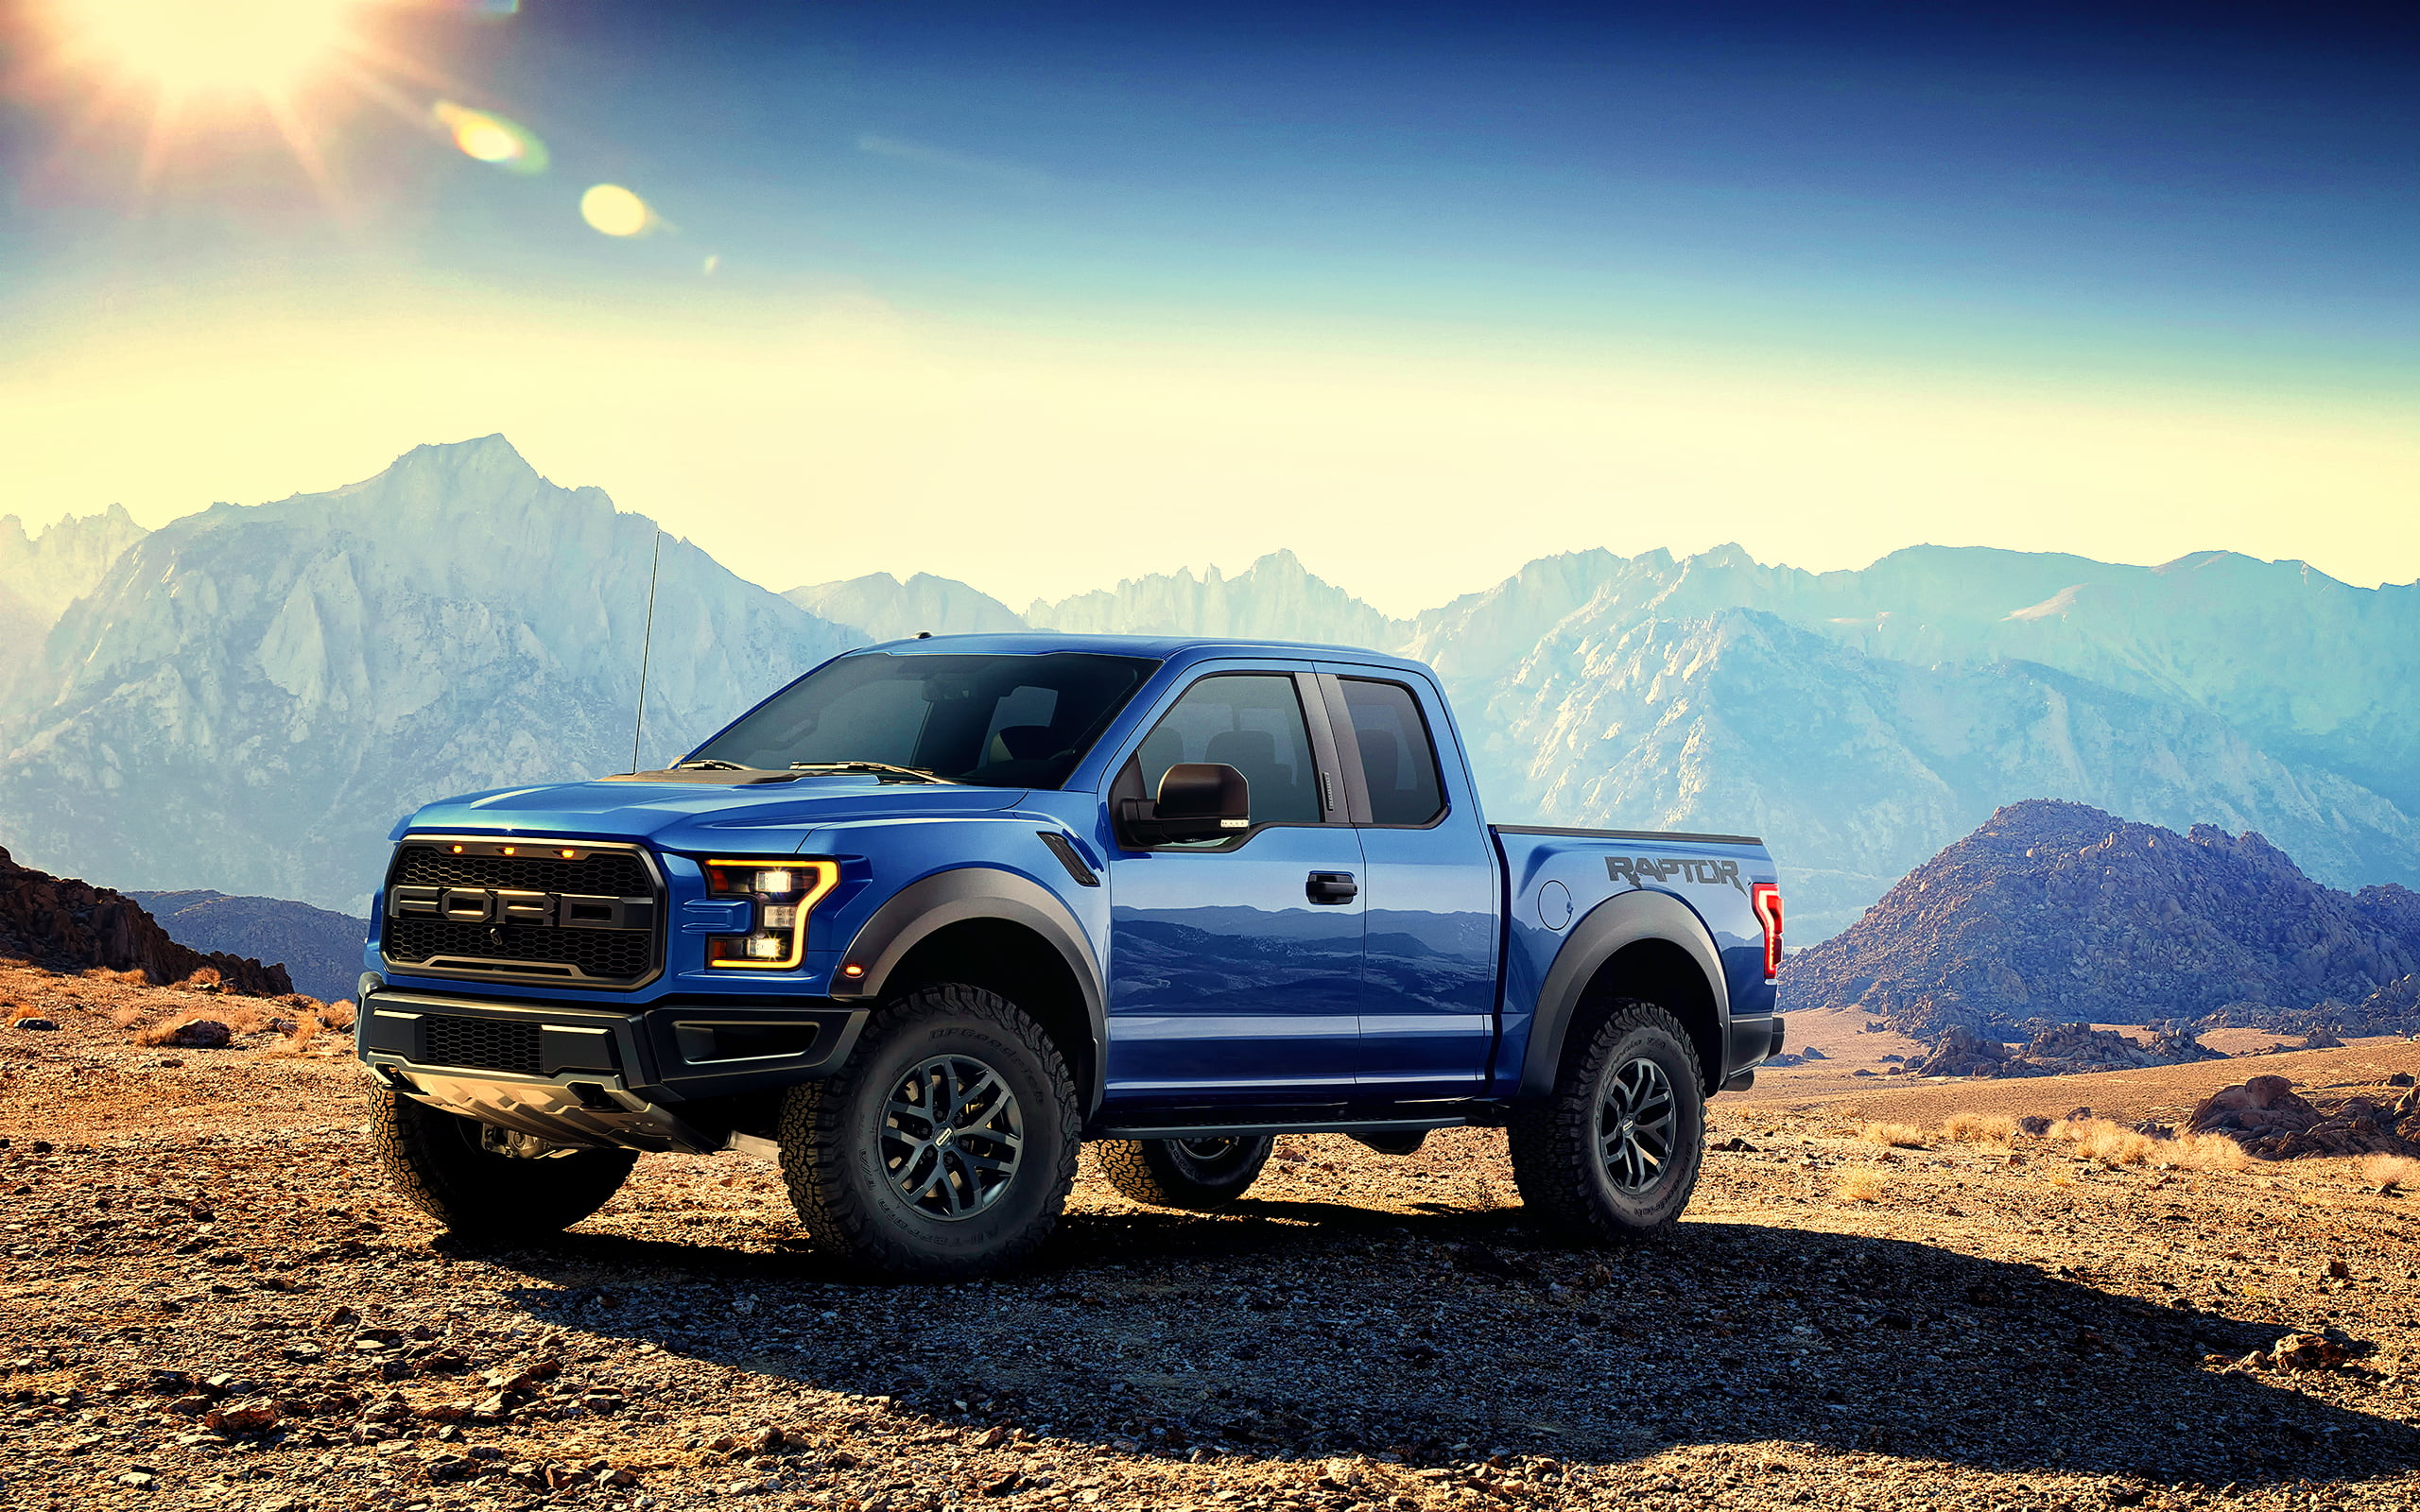 Blue Ford Extended Cab Truck Hd Wallpaper Wallpaper Flare